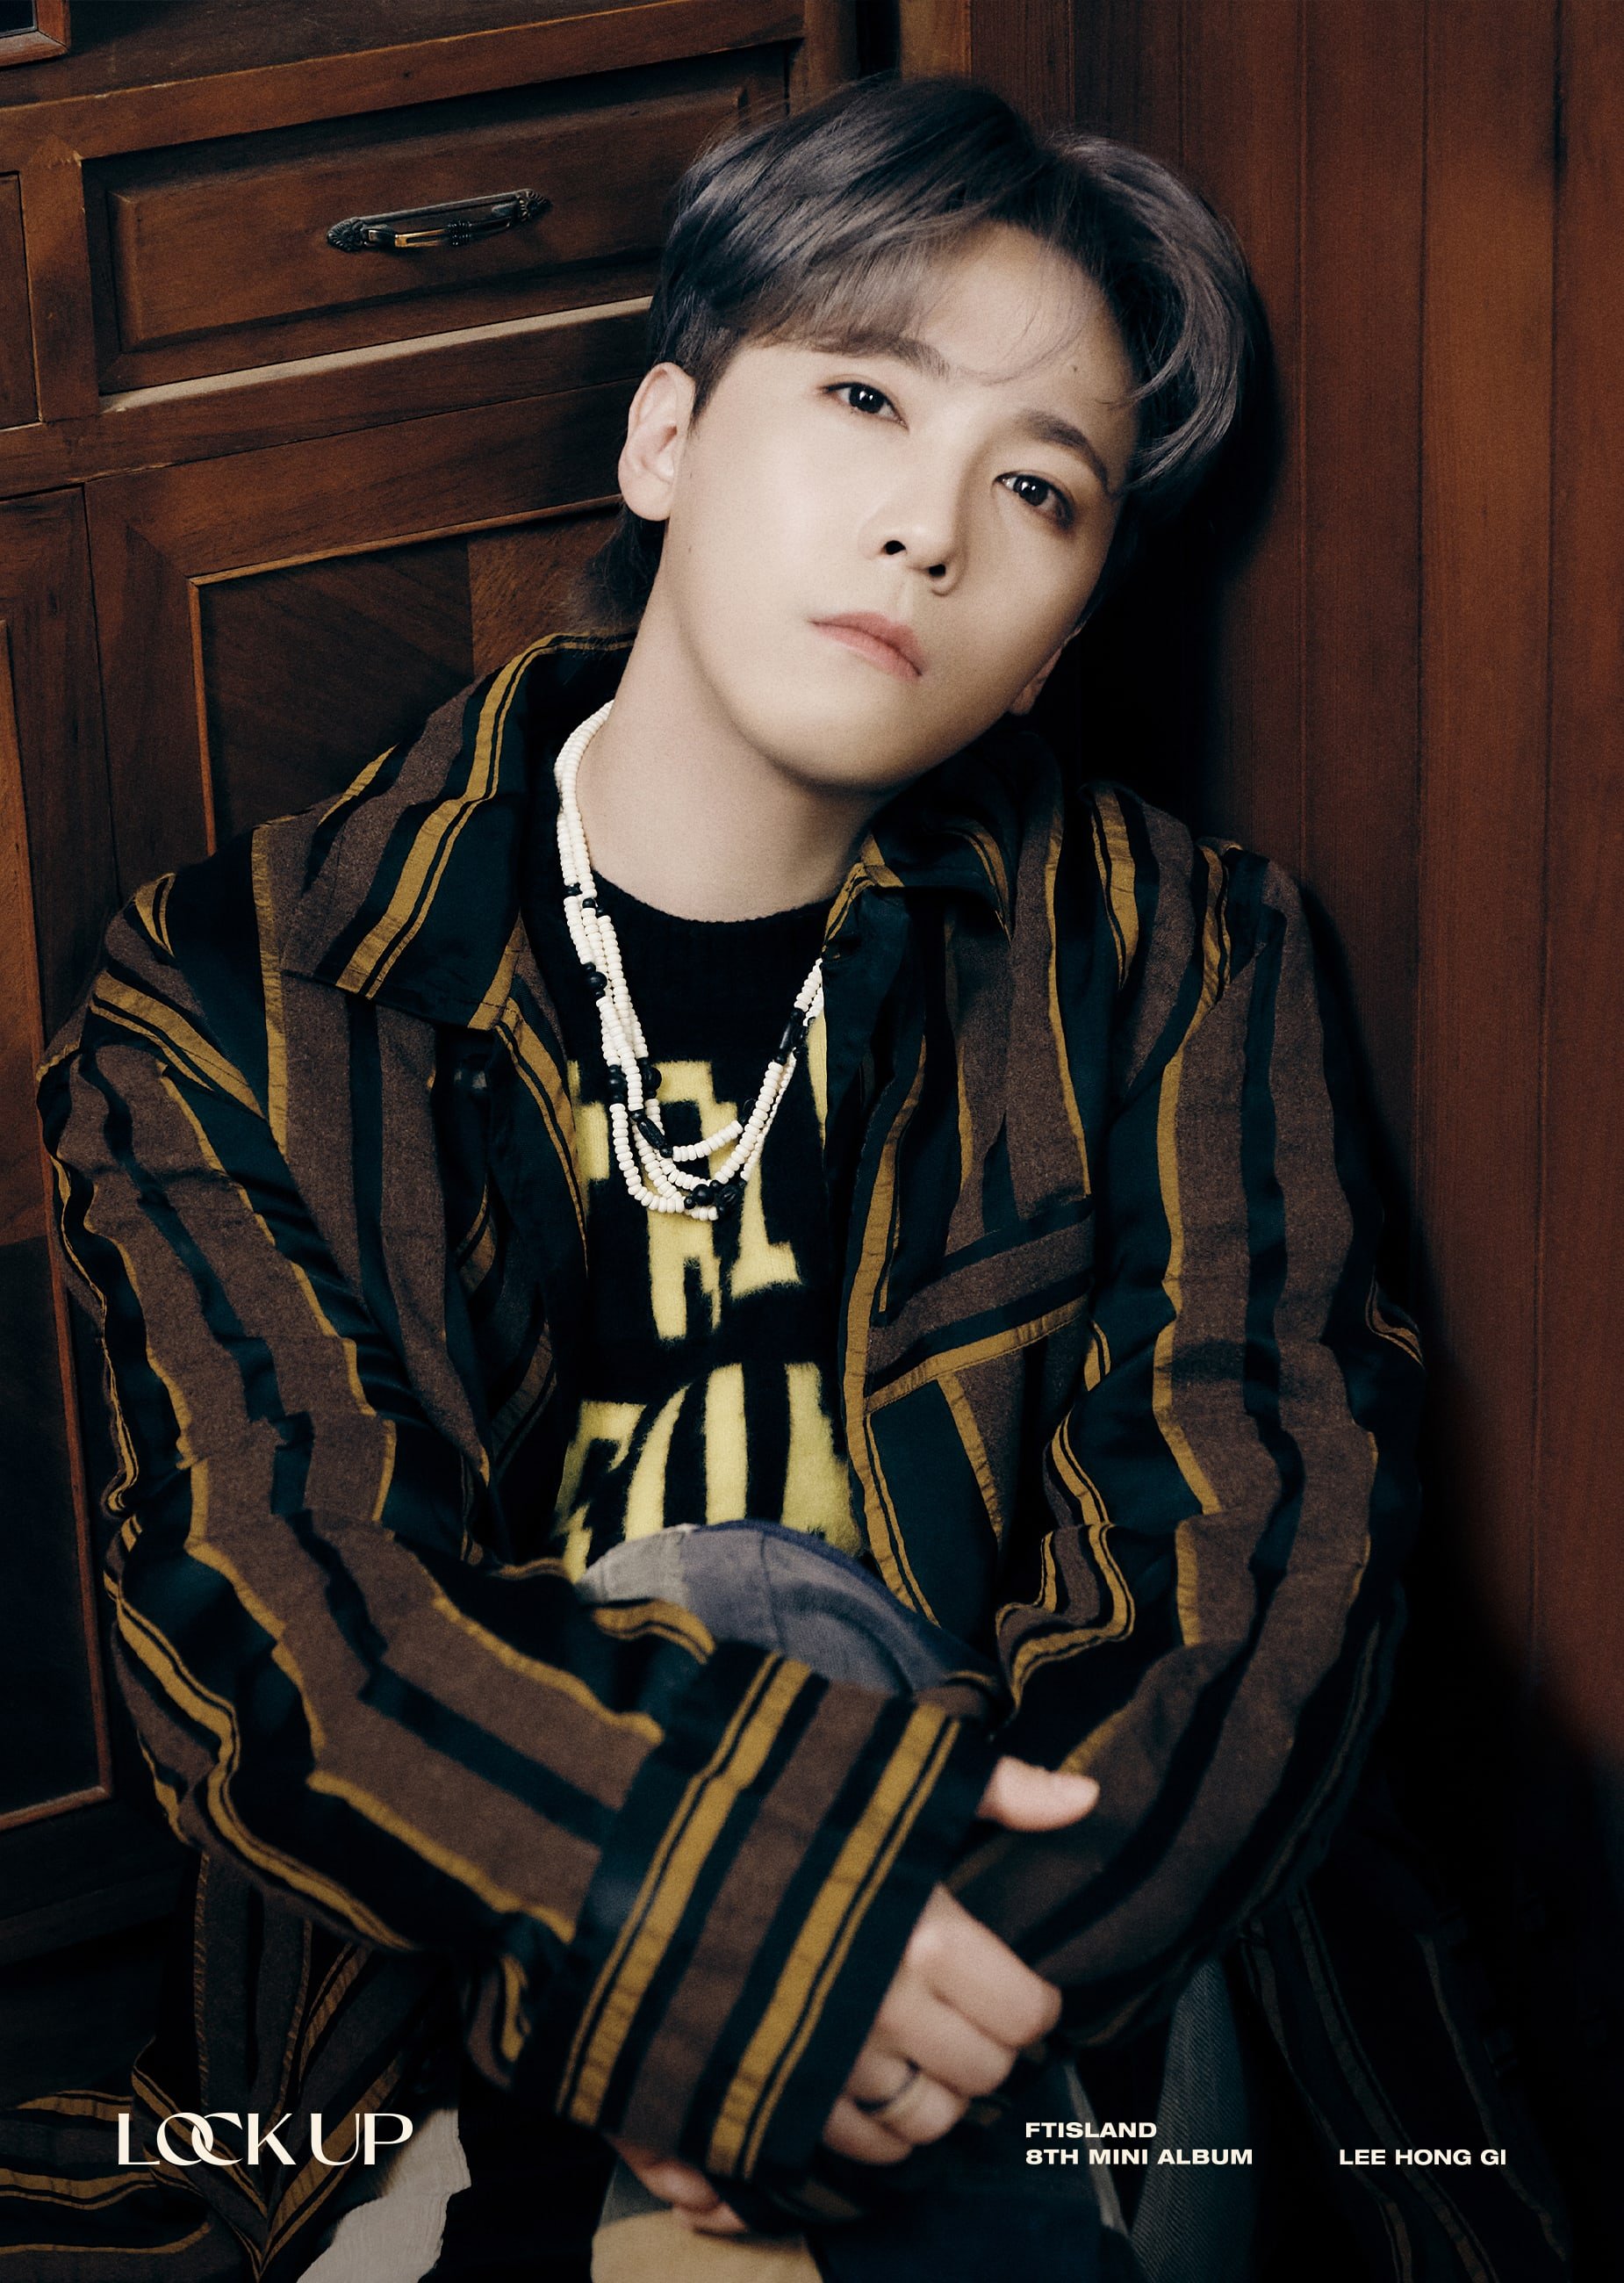 Lee Hong Gi music, videos, stats, and photos | Last.fm